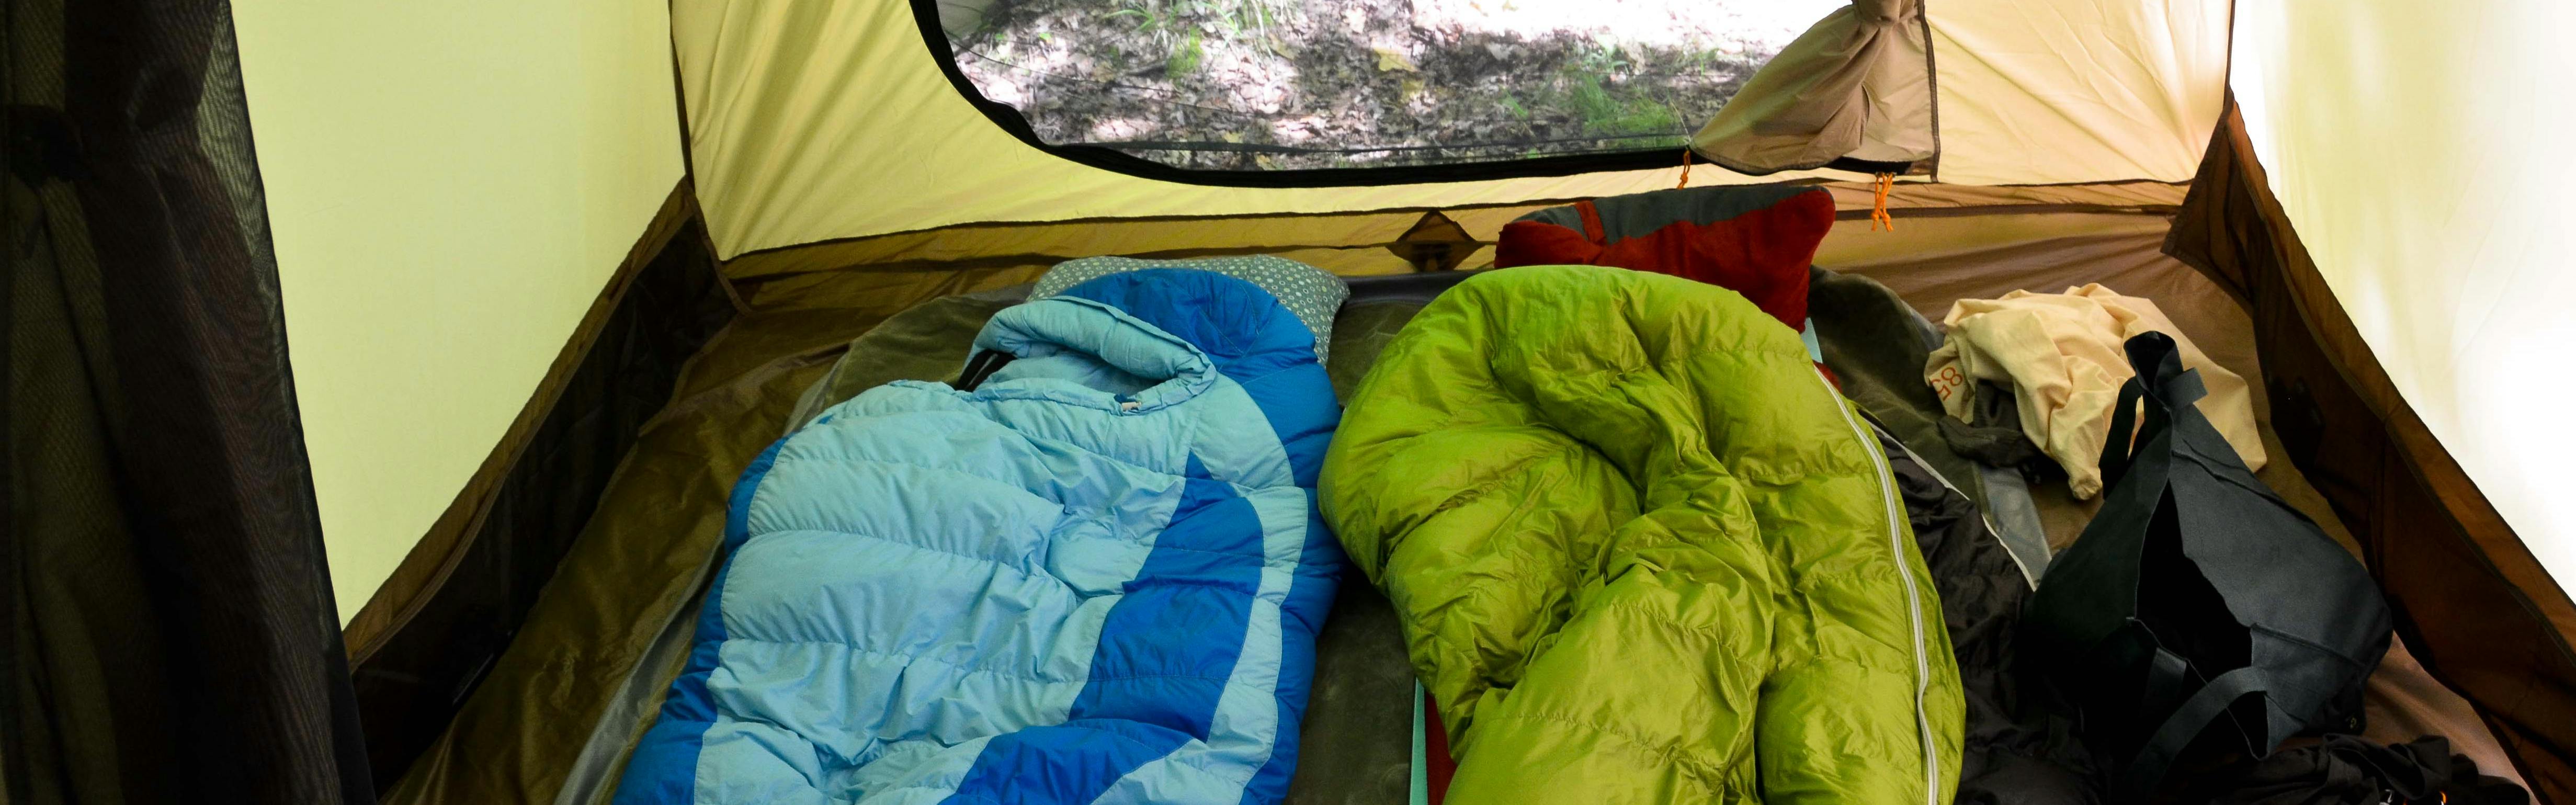 Two sleeping bags lay in a tent. One is green and one is blue.